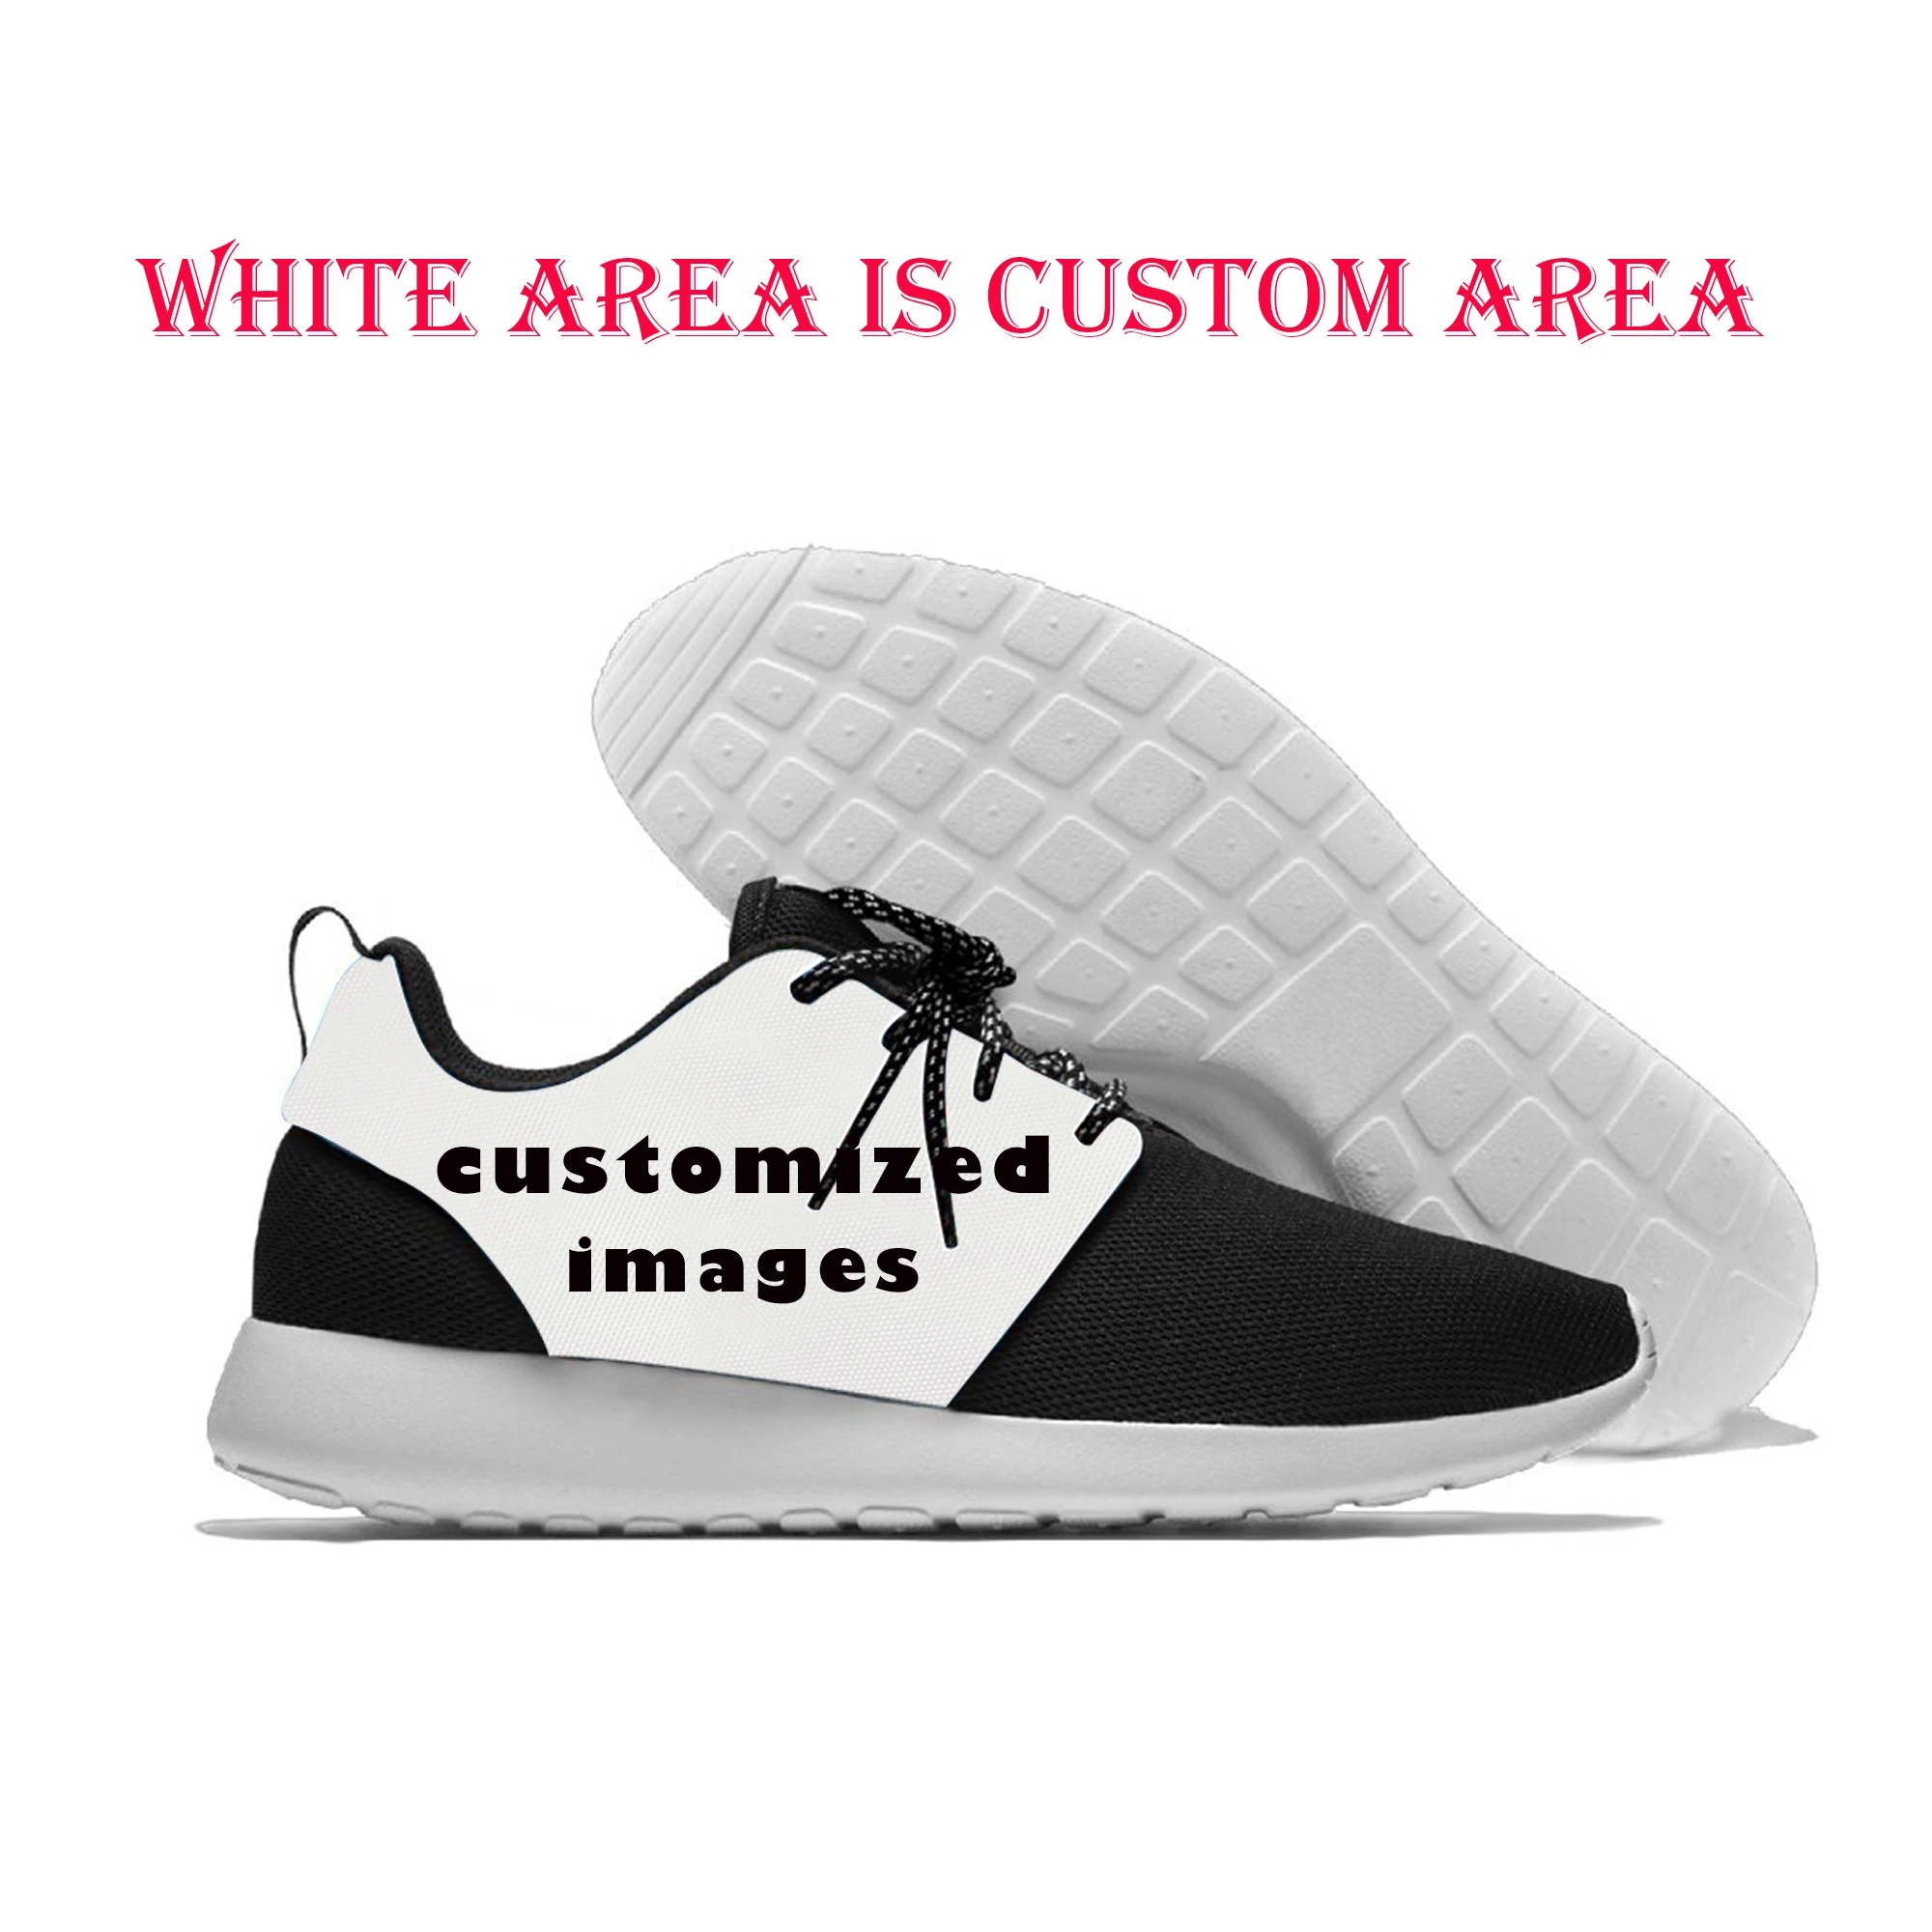 

Newest Casual David Lanham Funny High Quality Breathableb Cartoon Low Shoes Black Light Weight Outdoor Walking Sneakers Men